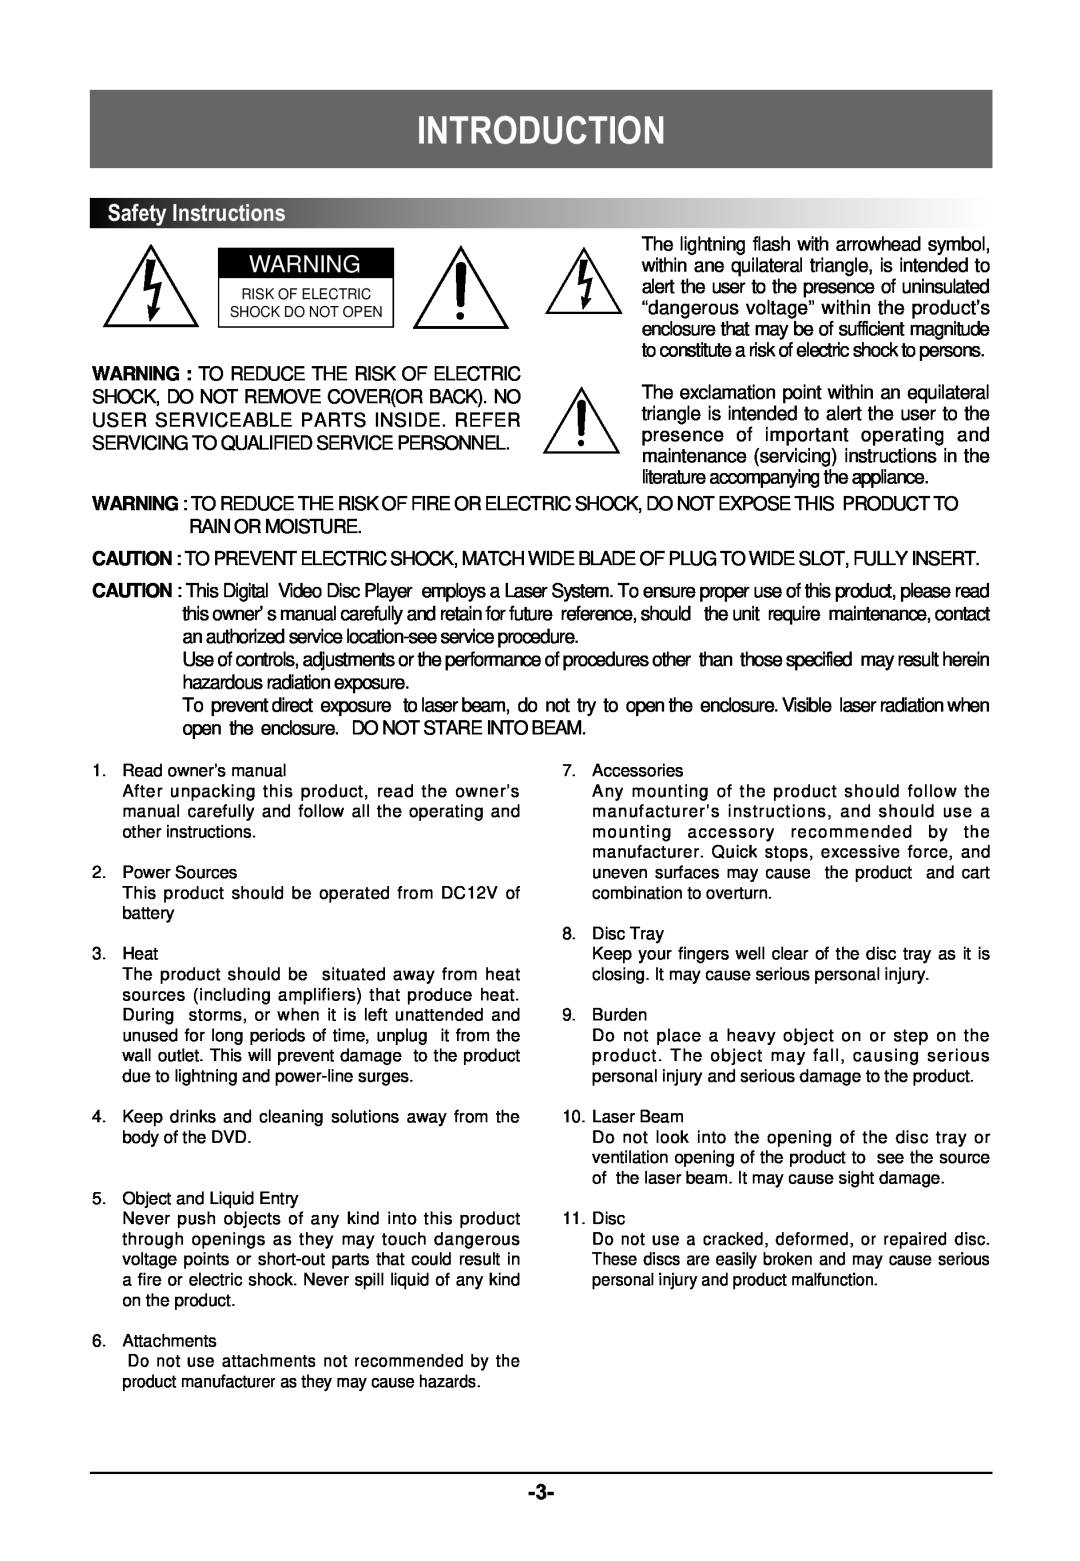 Farenheit Technologies DVD-19 owner manual SafetyInstructions, Introduction 